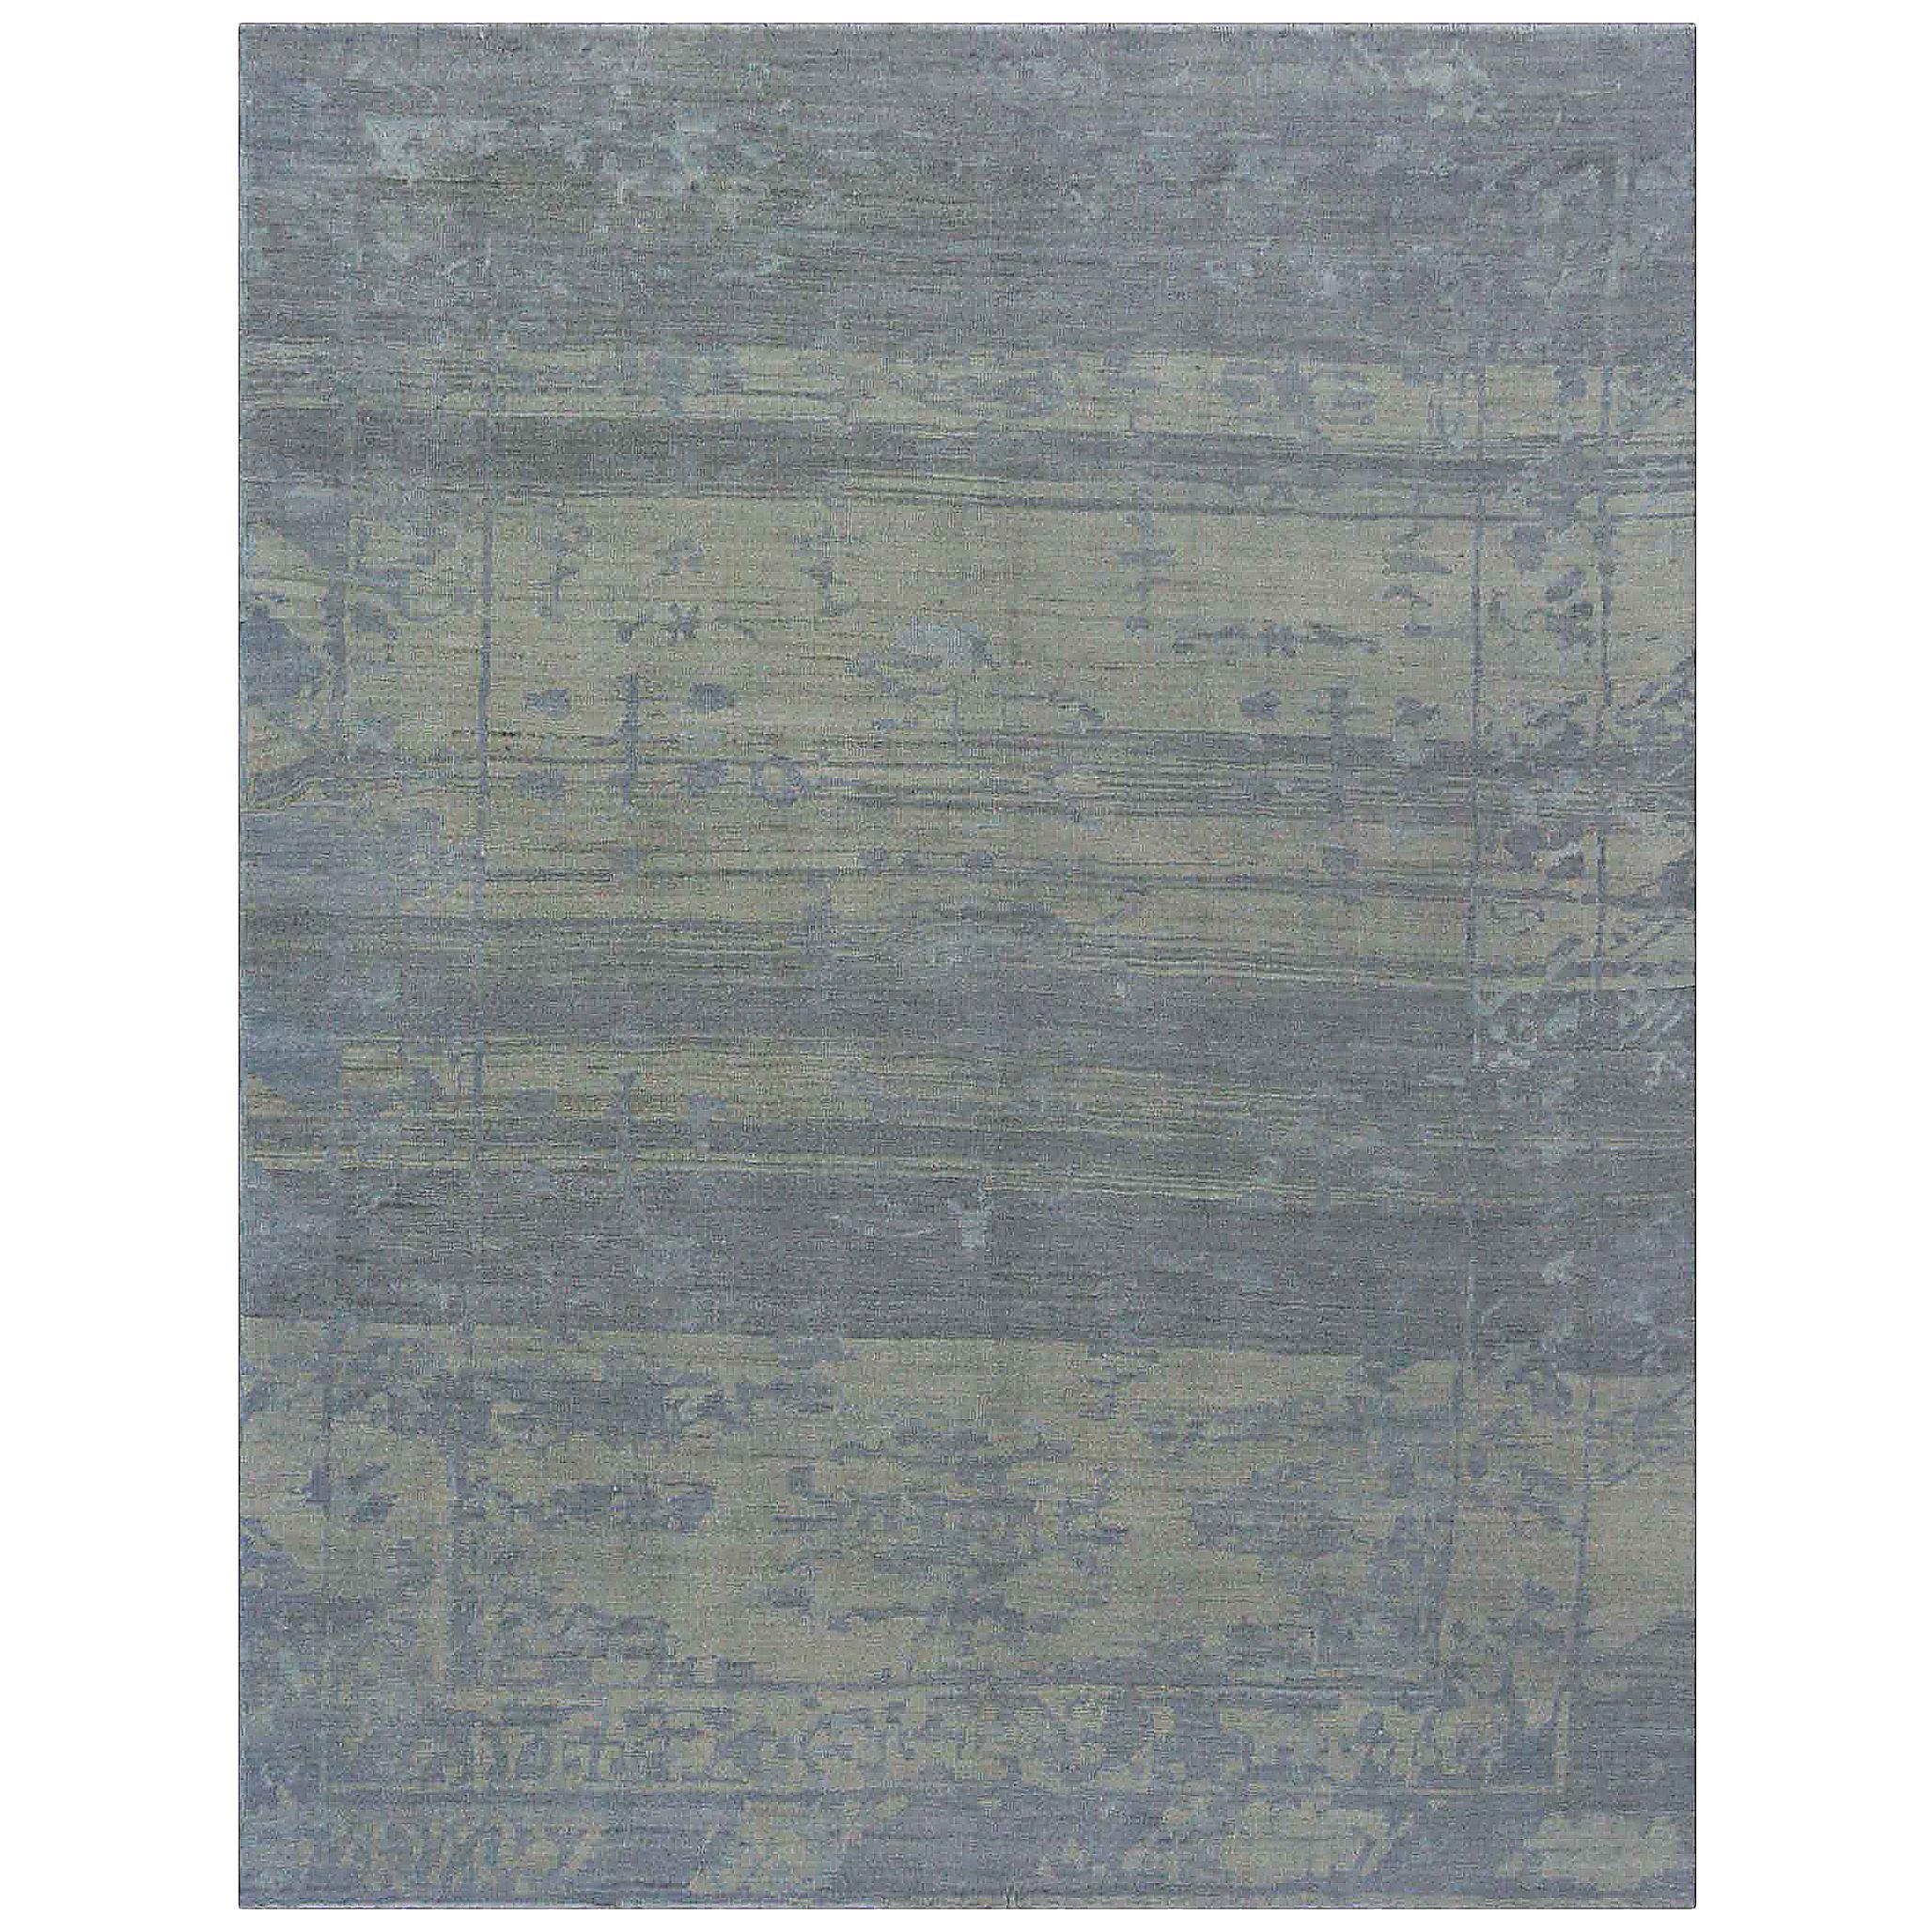 Contemporary Oushak Rug with Floral Motifs in Gray and Blue on Beige Field